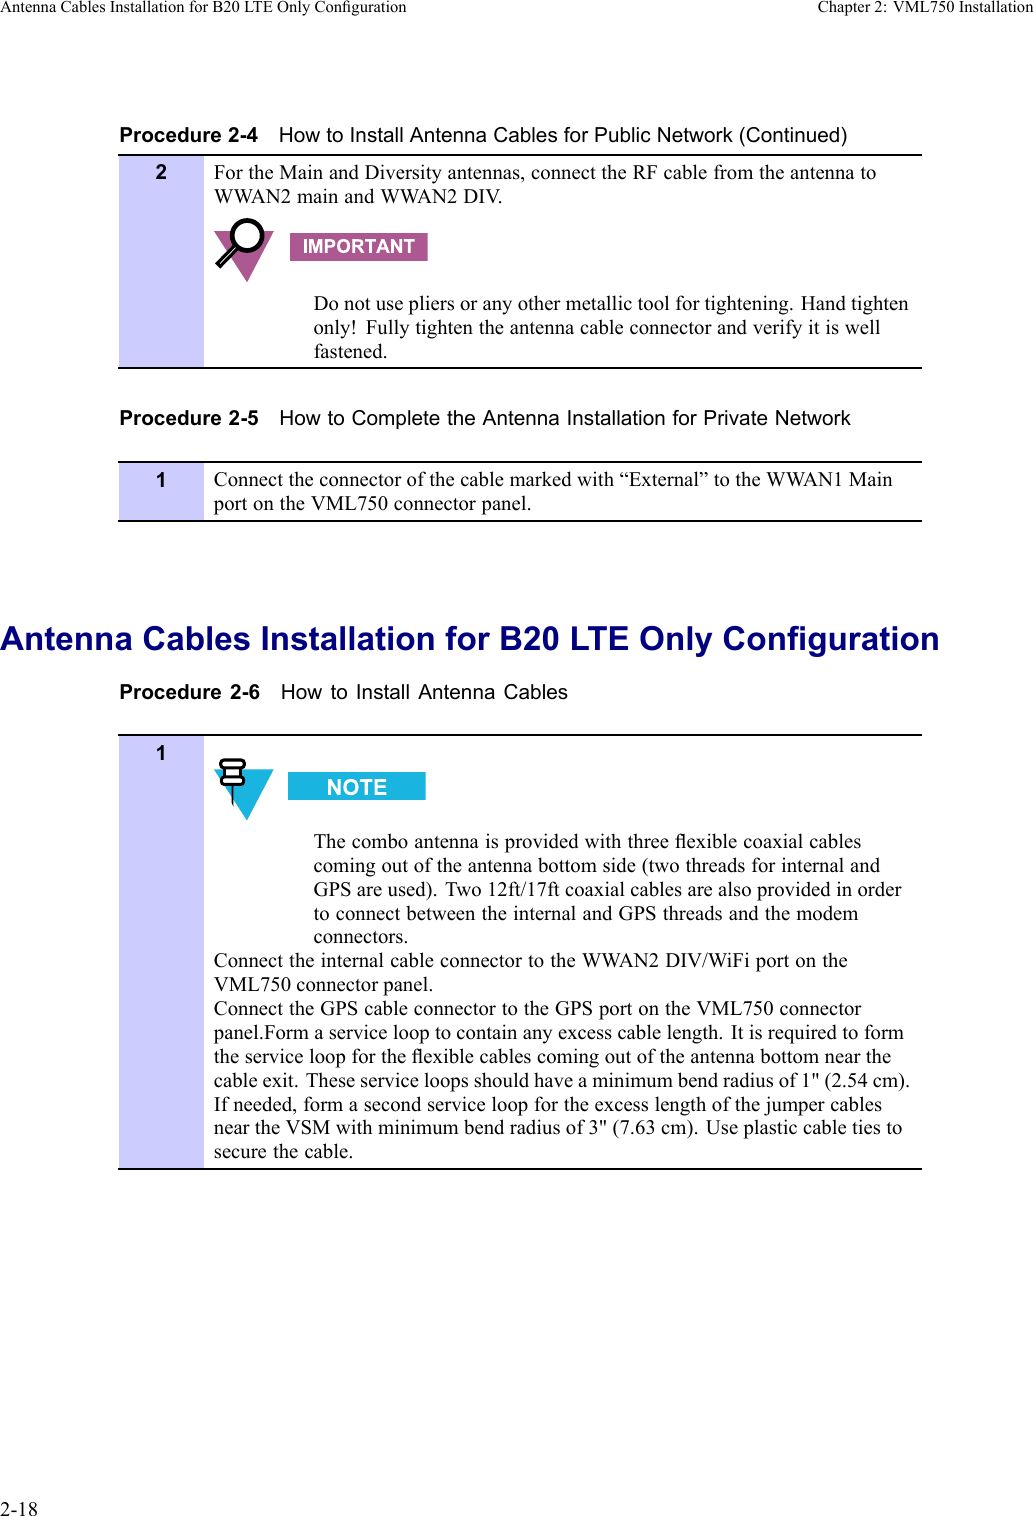 AntennaCablesInstallationforB20LTEOnlyCongurationChapter2:VML750InstallationProcedure2-4HowtoInstallAntennaCablesforPublicNetwork(Continued)2FortheMainandDiversityantennas,connecttheRFcablefromtheantennatoWW AN2mainandWW AN2DIV .Donotusepliersoranyothermetallictoolfortightening.Handtightenonly!Fullytightentheantennacableconnectorandverifyitiswellfastened.Procedure2-5HowtoCompletetheAntennaInstallationforPrivateNetwork1Connecttheconnectorofthecablemarkedwith“External”totheWWAN1MainportontheVML750connectorpanel.AntennaCablesInstallationforB20LTEOnlyCongurationProcedure2-6HowtoInstallAntennaCables1Thecomboantennaisprovidedwiththreeexiblecoaxialcablescomingoutoftheantennabottomside(twothreadsforinternalandGPSareused).Two12ft/17ftcoaxialcablesarealsoprovidedinordertoconnectbetweentheinternalandGPSthreadsandthemodemconnectors.ConnecttheinternalcableconnectortotheWW AN2DIV/WiFiportontheVML750connectorpanel.ConnecttheGPScableconnectortotheGPSportontheVML750connectorpanel.Formaservicelooptocontainanyexcesscablelength.Itisrequiredtoformtheserviceloopfortheexiblecablescomingoutoftheantennabottomnearthecableexit.Theseserviceloopsshouldhaveaminimumbendradiusof1&quot;(2.54cm).Ifneeded,formasecondserviceloopfortheexcesslengthofthejumpercablesneartheVSMwithminimumbendradiusof3&quot;(7.63cm).Useplasticcabletiestosecurethecable.2-186802988C54-BJuly2014